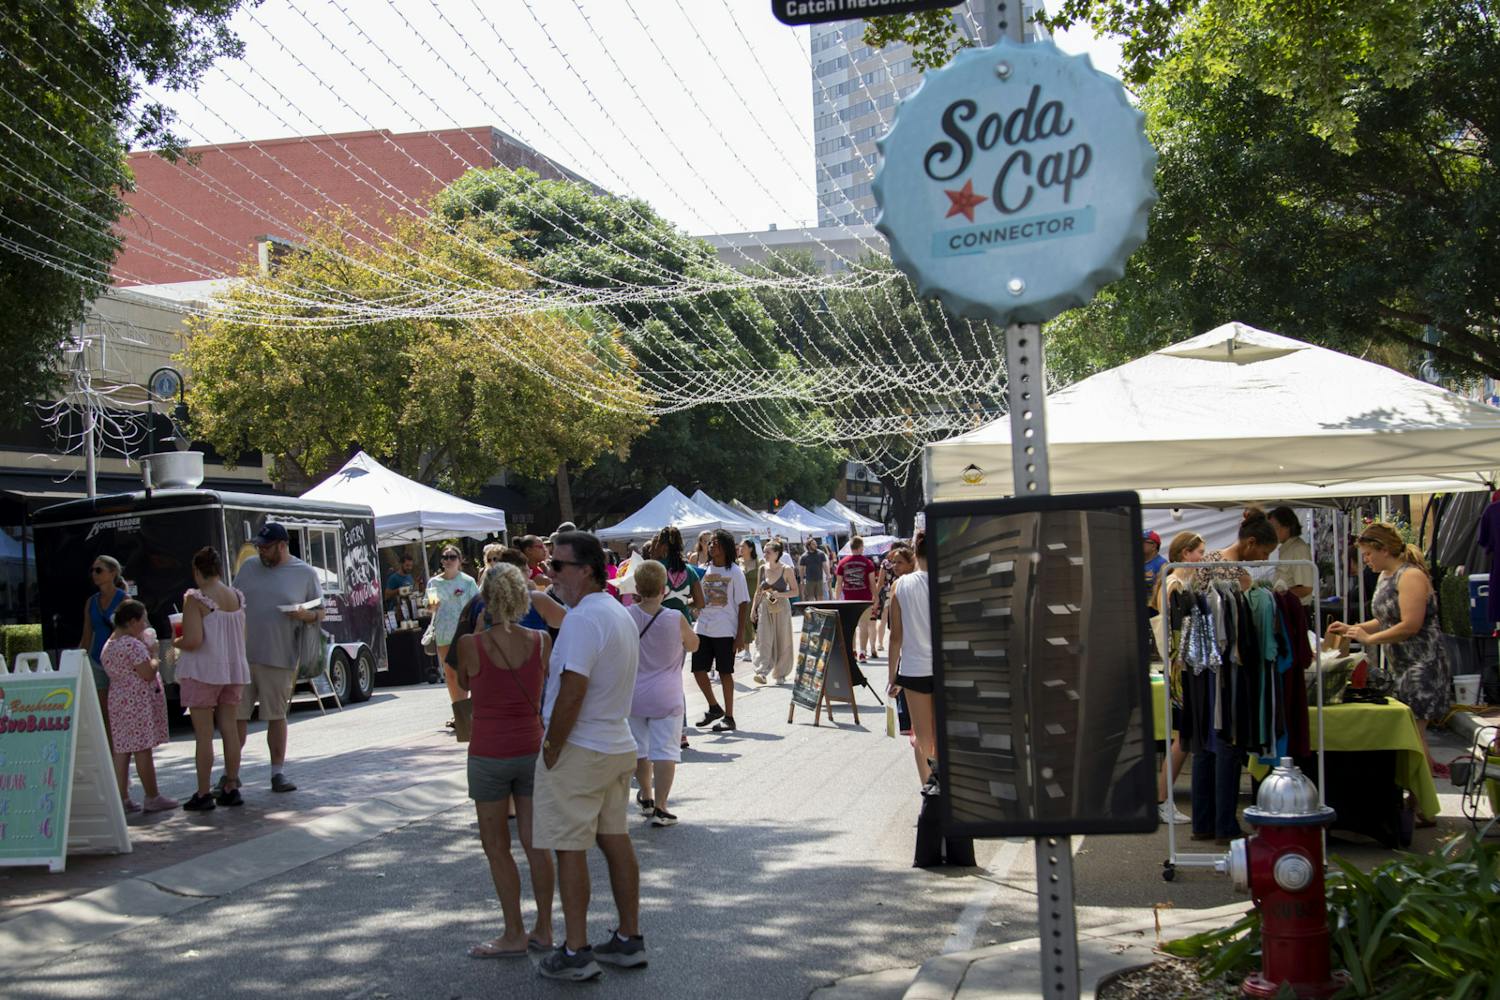 FILE&nbsp;—&nbsp;&nbsp;The Soda Cap Connector sign stands on Main St. during Soda City Market on Aug. 26, 2023. The Soda Cap Connector is a $1 bus line that brings commuters to Columbia's attractions.&nbsp;